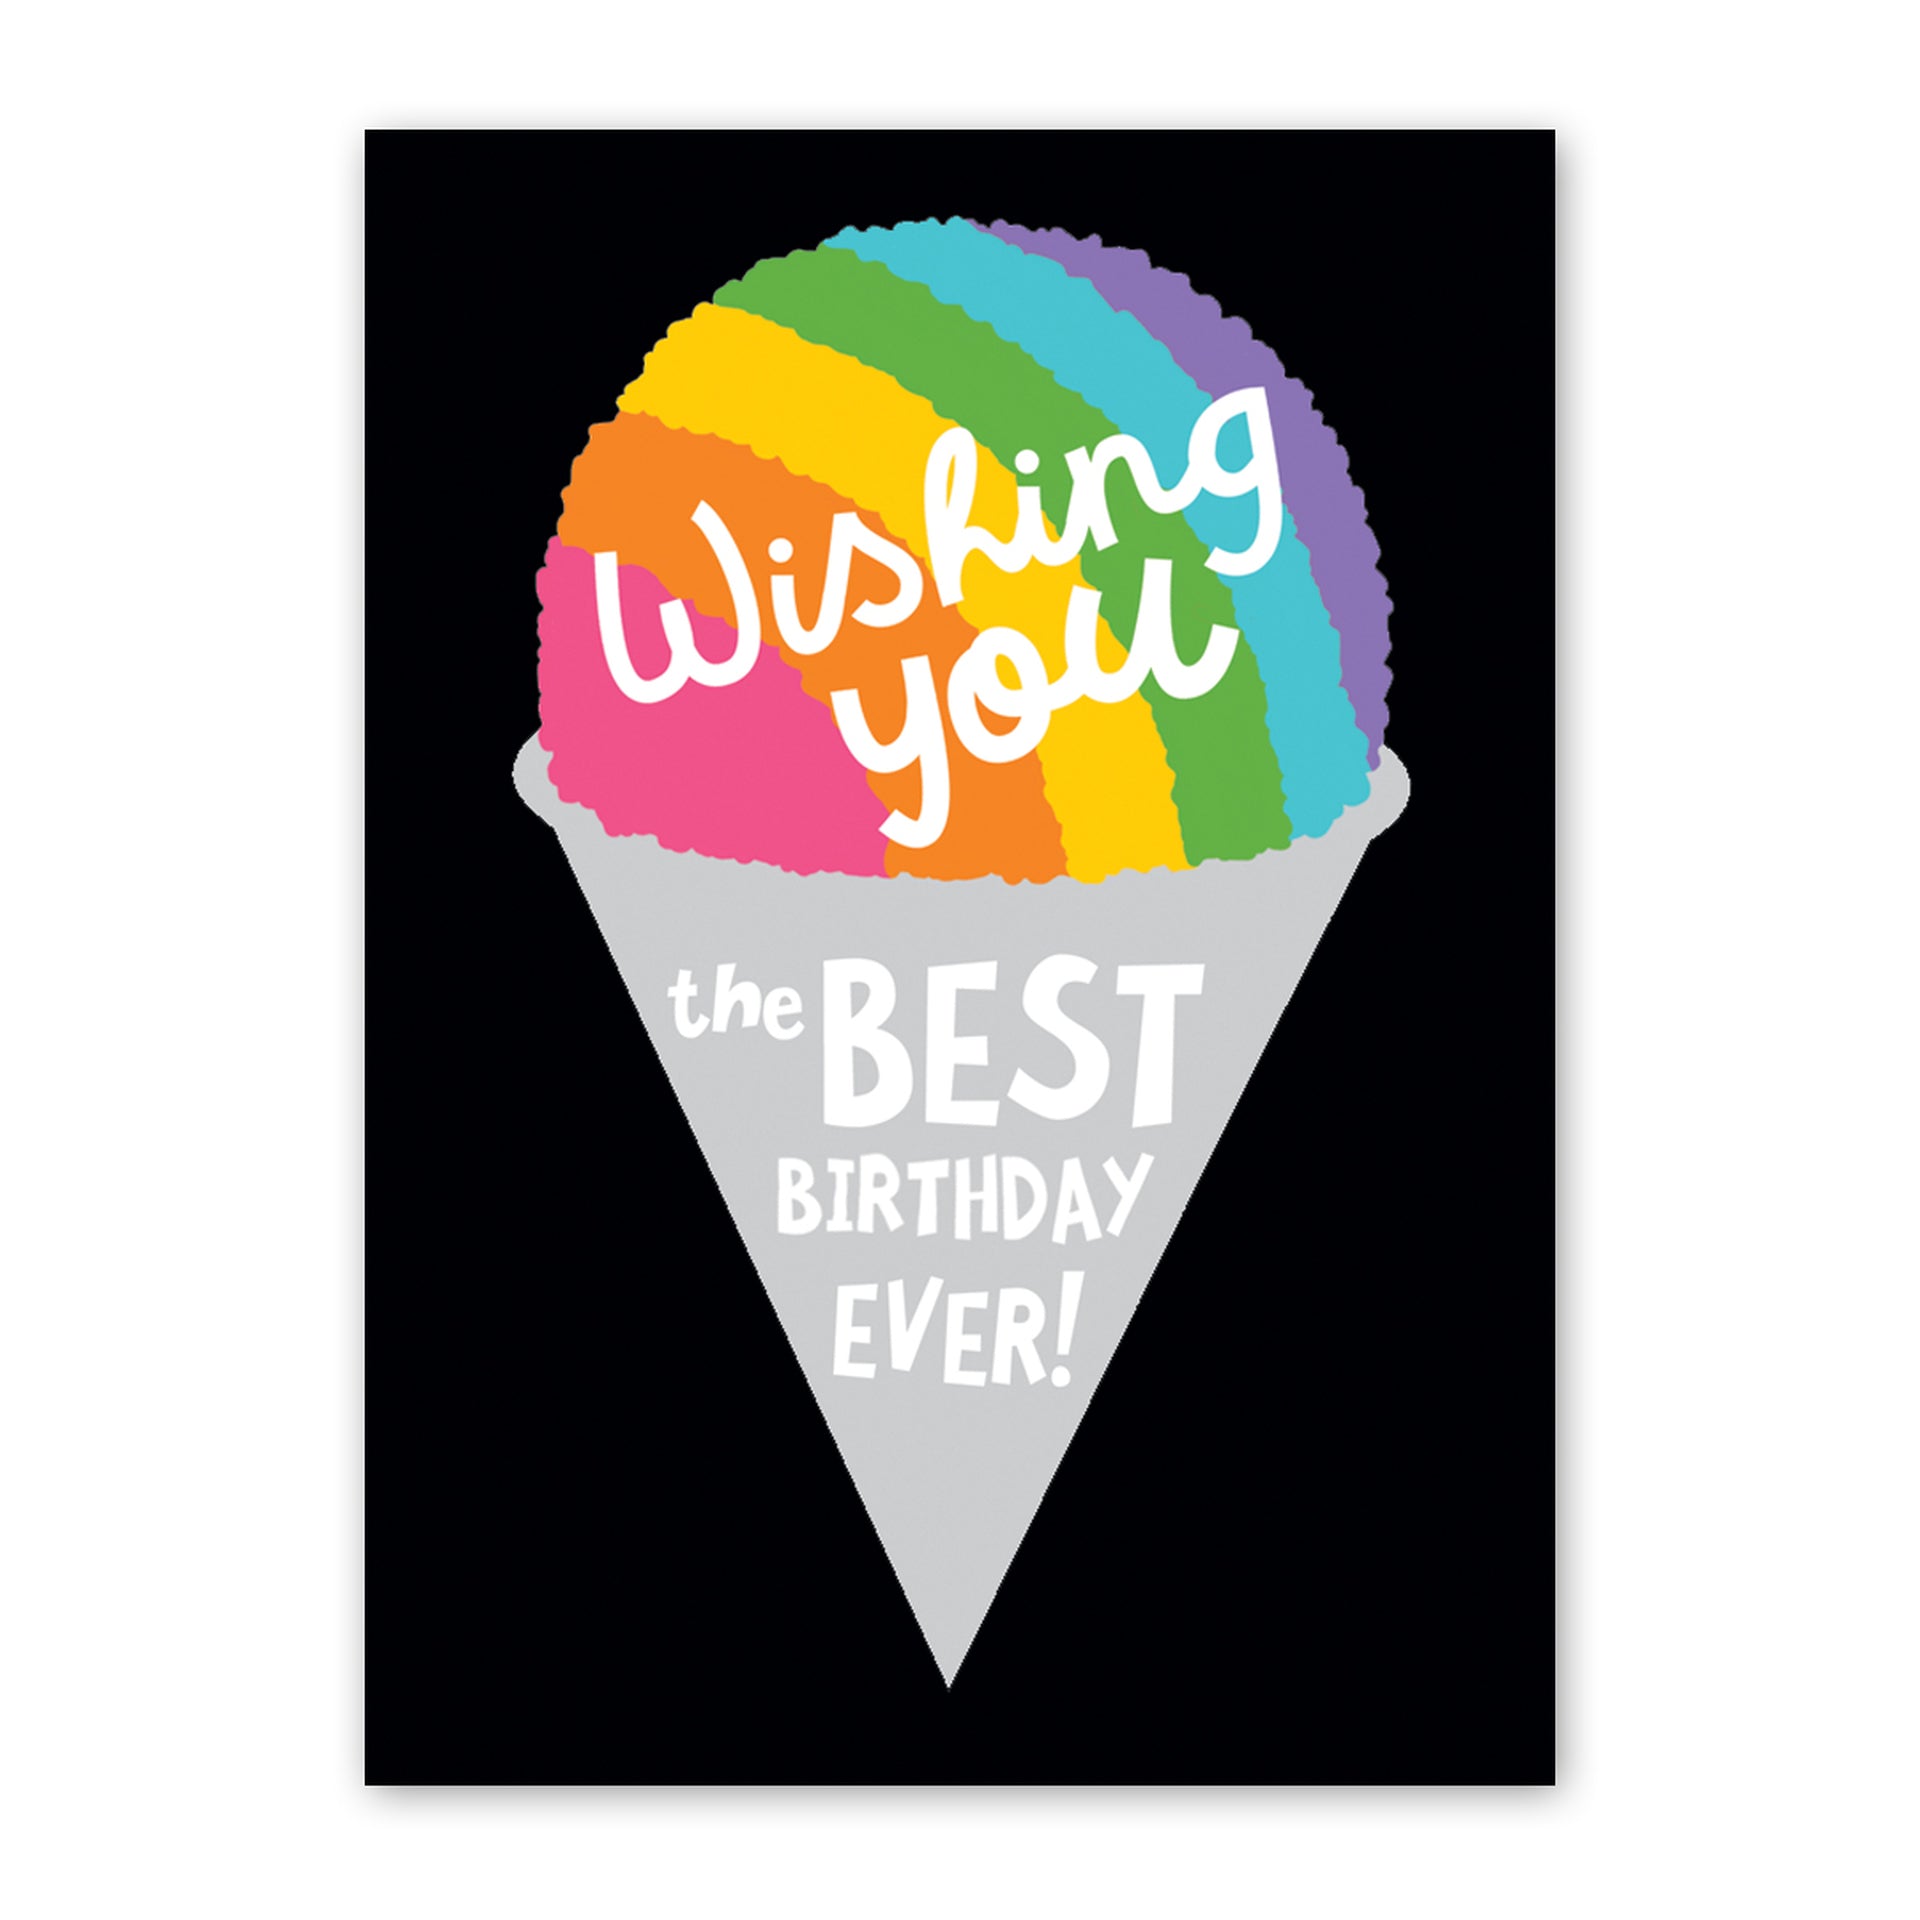 wishing you the best birthday ever greeting card